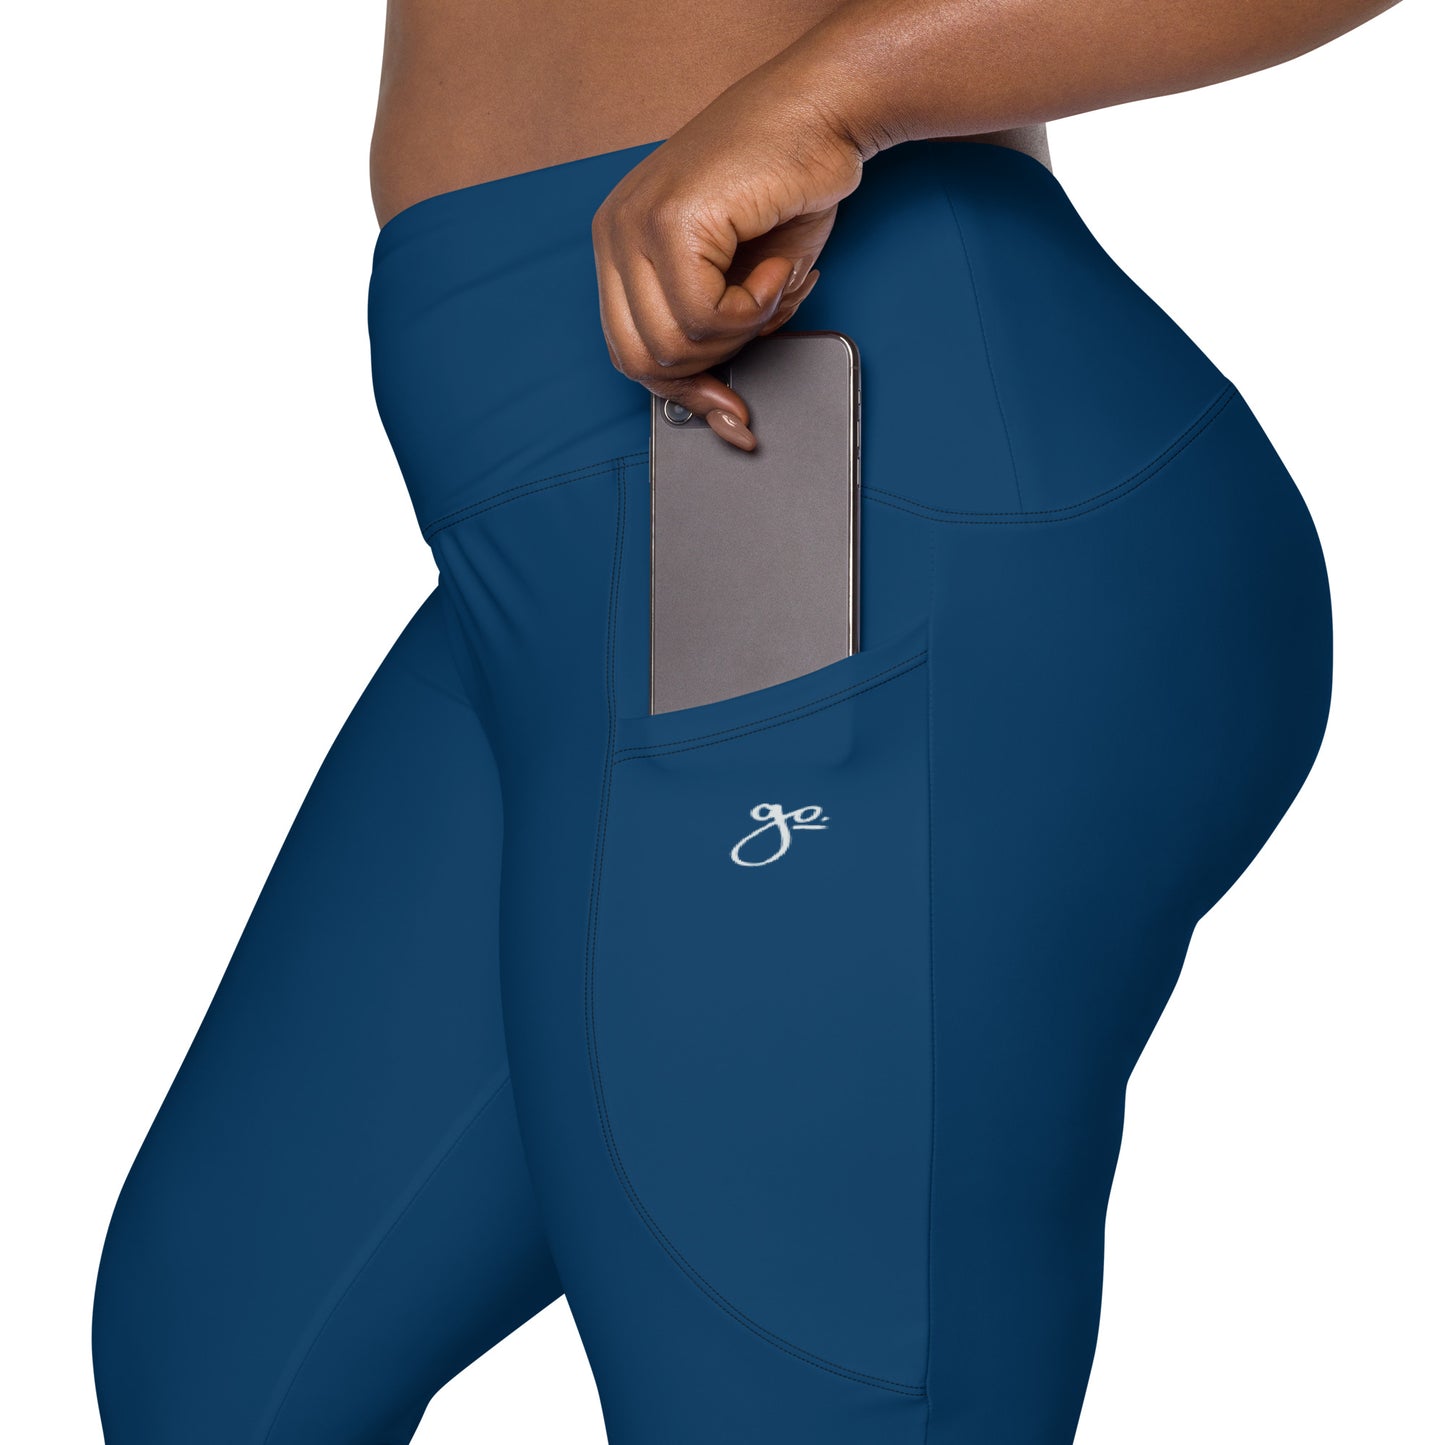 Go. Leggings With Pockets - Blue